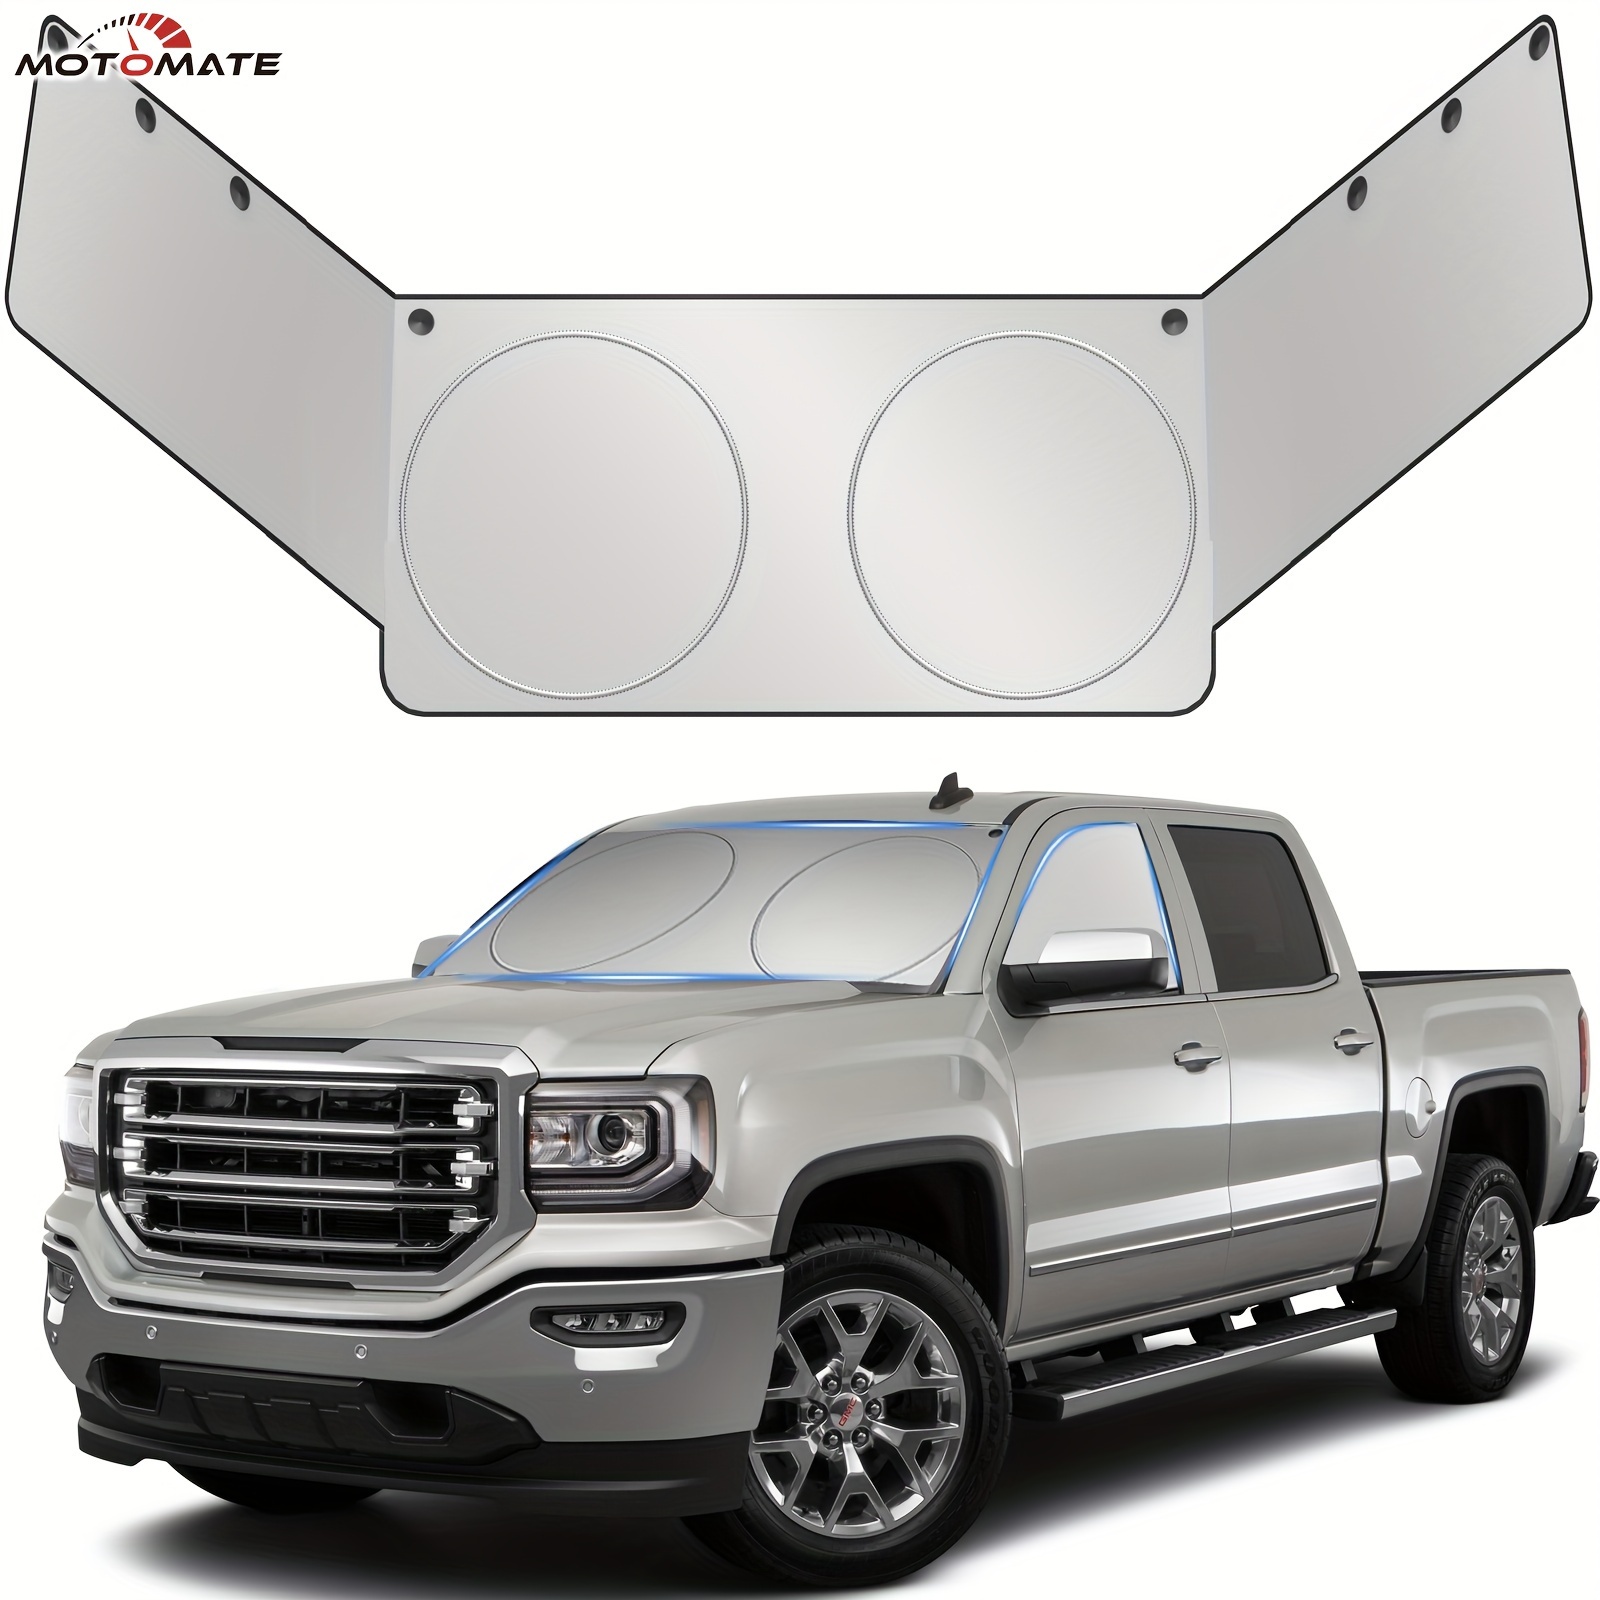 

Motomate For Windshield Sun Shade-front And Side Window Sun Cover Block Sun Heat Protect Vehicle Interior Accessories Sunshades Prevent Prying And Protect Privacy (front + Side (l))